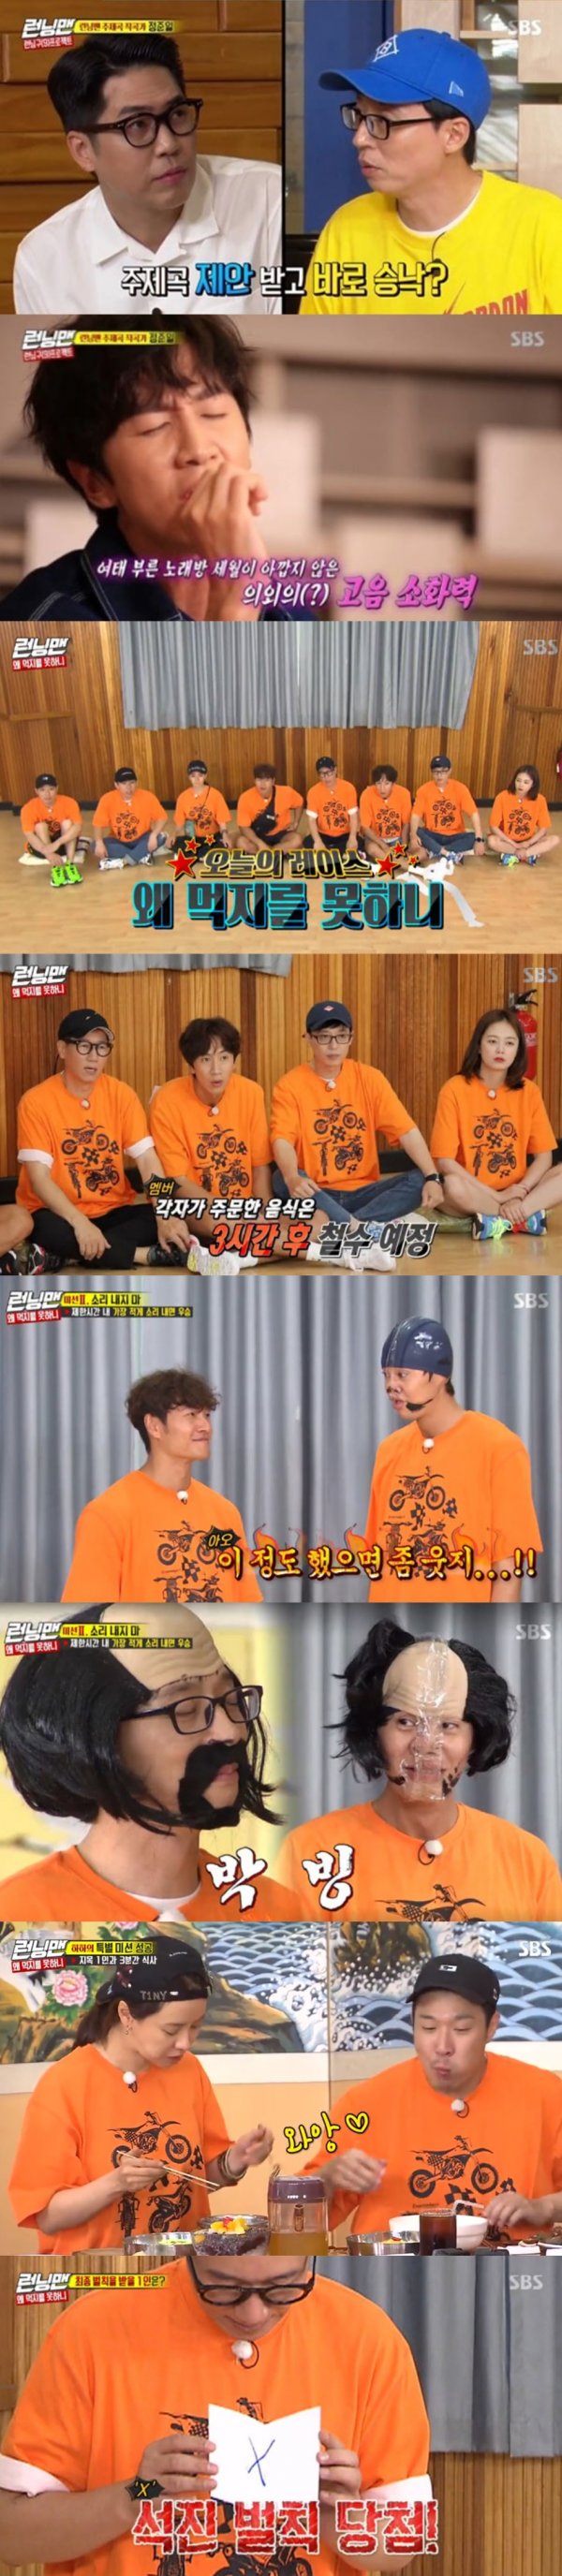 SBS Running Man took the first pRace in the same time zone of 2049 Target Viewpoint, which was strong during the holiday season.According to Nielsen Korea, the ratings agency, Running Man, which aired on the 4th, soared to 7.4% of the highest audience rating per minute, and the 2049 target audience rating, an important indicator of major advertising officials, recorded 3.1% (based on the second part of the audience rating of households in the metropolitan area), beating all Masked Wang and Donkey Ears.On the day of the show, singer Jeong Joon-Il, who will be a composer of the theme song Running Man, appeared in a surprise and attracted attention.Jung Jun-il released his first melody line to the members, saying, I liked Running Man and accepted it immediately when I received the theme song proposal.The members cheered, saying, Its really good, and raised expectations for the theme song Running Man, which will be combined with the members lyrics.In addition, on the day of the broadcast, Why can not I eat race was also held.It was a mission that only needed to eat the food in front of it for a long time, but as the fate was decided by the Bokbokbok card, a fierce food competition between the members was held.In particular, the second round mission, Do not Scream, should not be made, and the Makeup Show was held for a long time, and Choi Soo-in, who shines in the National Athletics Championship 2, participated in the event, making the members confused with his amazing running skills.On the other hand, Haha and Song Ji-hyo succeeded in eating as a result of the race final, and this scene won the best one minute with the highest audience rating of 7.4% per minute.Ji Seok-jin won the penalty and will perform a makeup show when he appears as a guest at the Running Zone, a Running Man fan meeting held on the 26th (Mon).Running Man is receiving an application for the 9th anniversary Korean fan meeting Running Districts participation in viewers through its official website until the 10th.More information on how to participate can be found on the official website of Running Man.